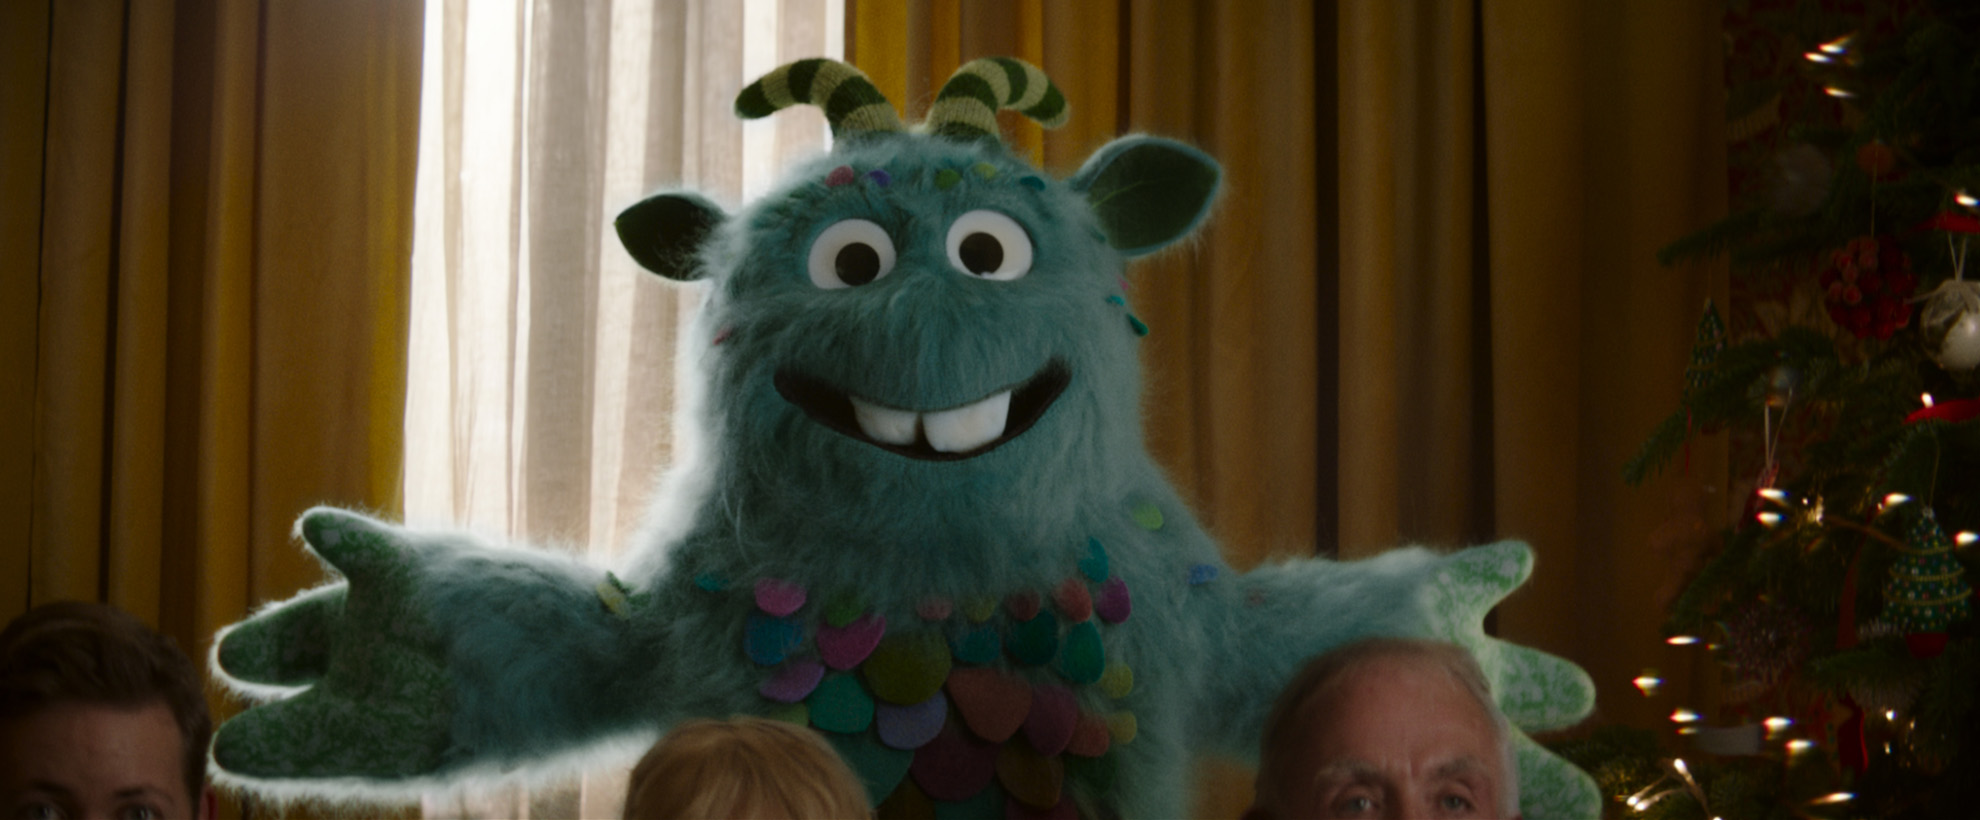 A blue fuzzy monster with stripey horns is standing in a living room, there are the foreheads of three people in the foreground.